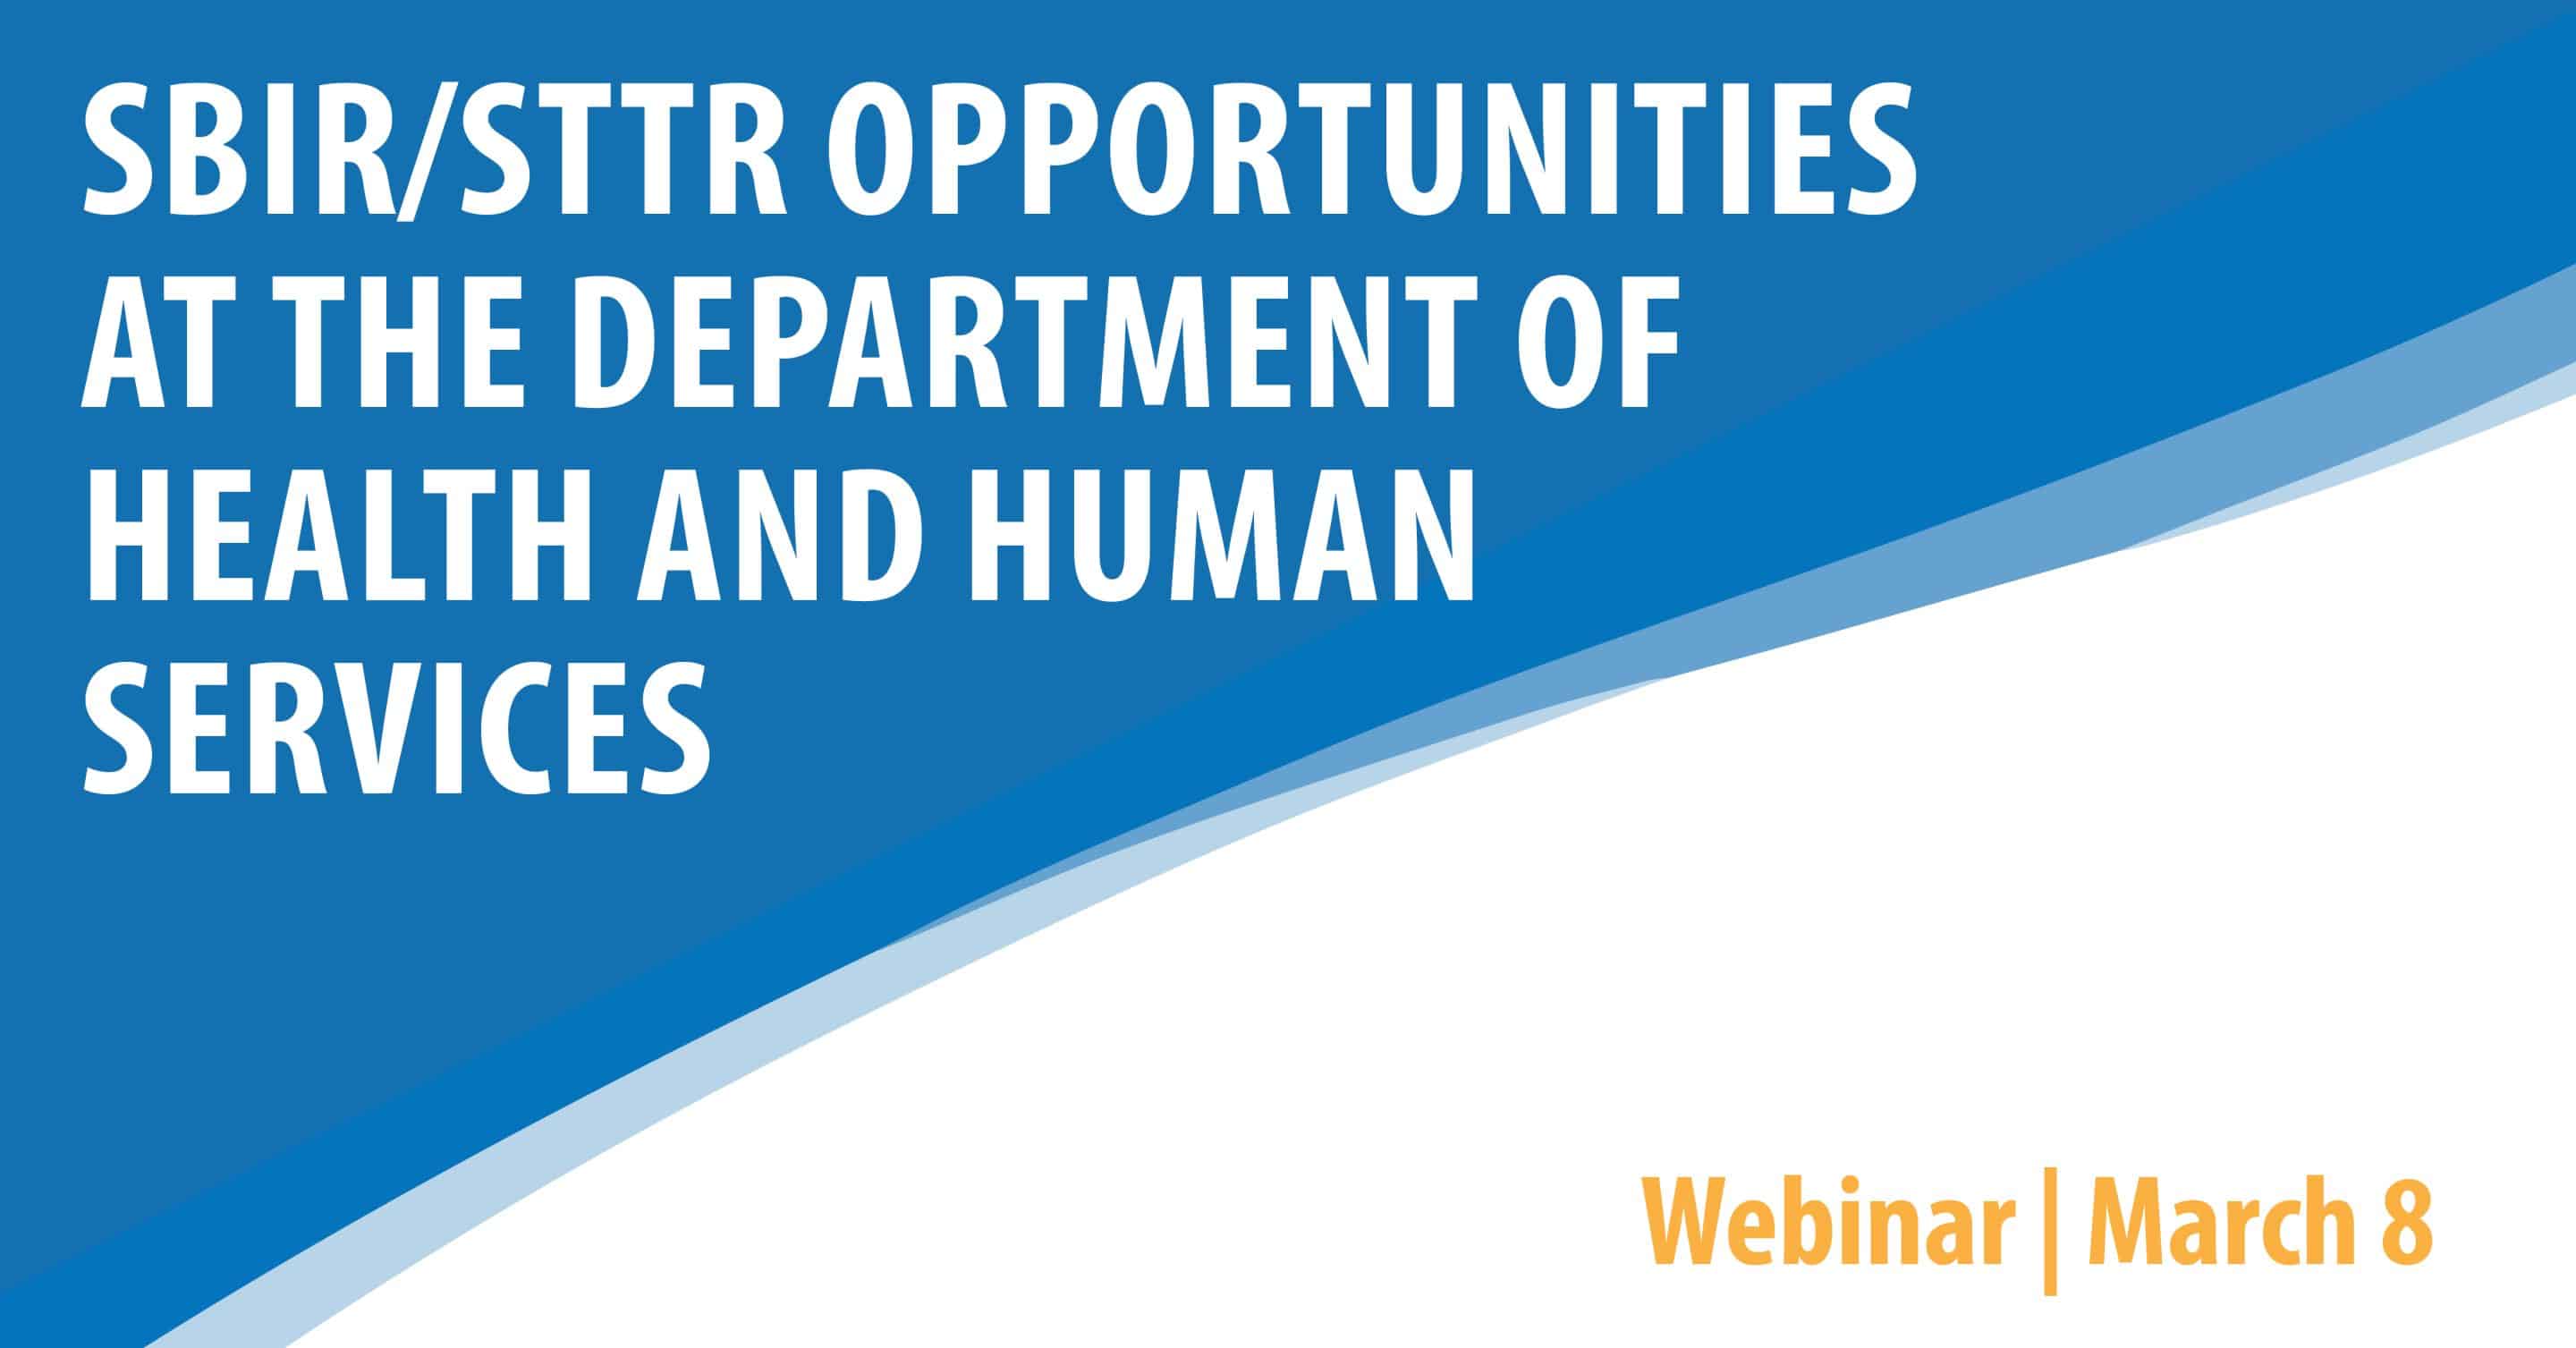 SBIR/STTR Opportunities at the Department of Health and Human Services